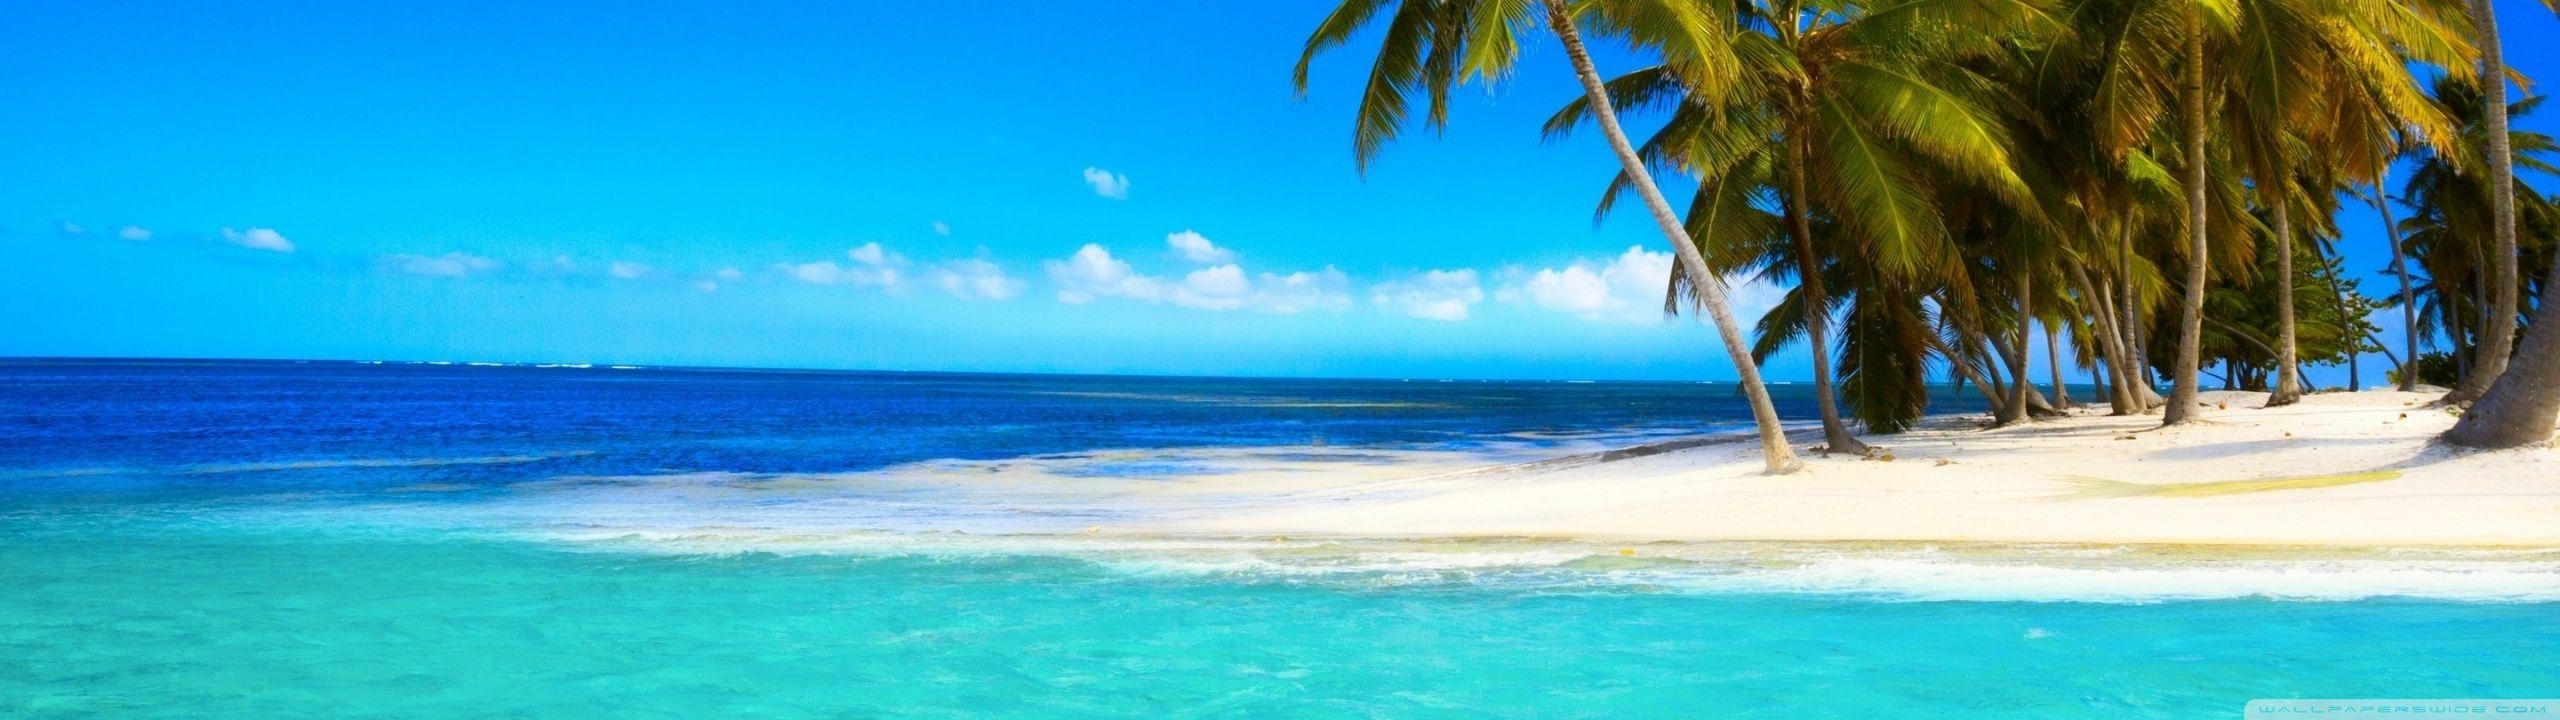 High Resolution Dual Monitor Beach Wallpapers - Top Free High